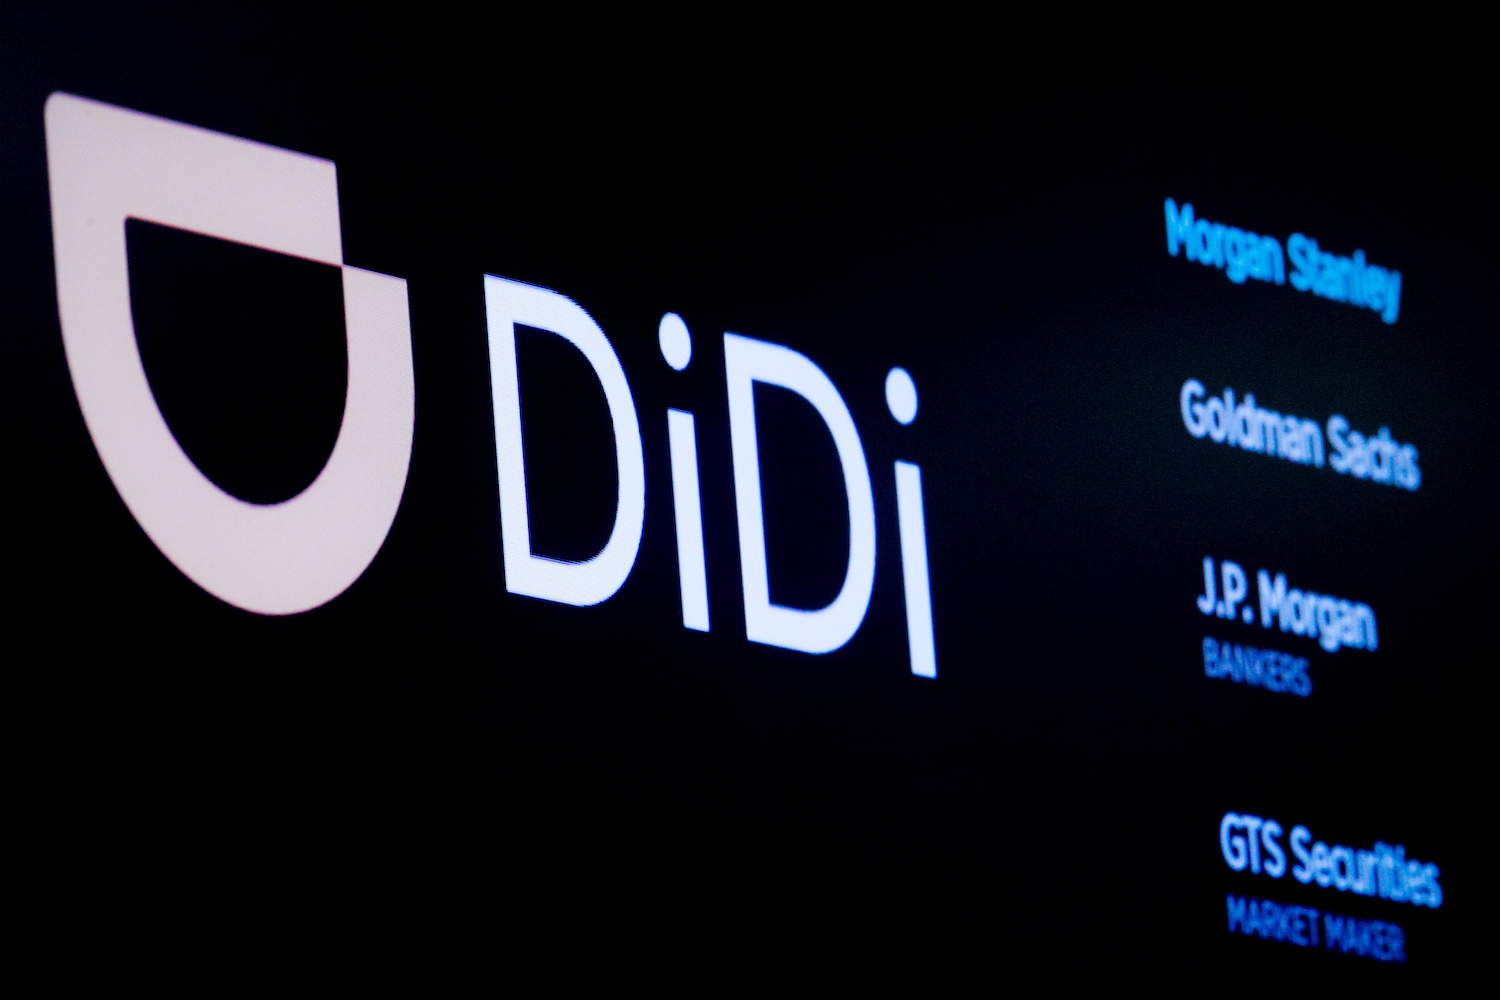 The logo for Chinese ride-hailing company Didi Global is seen during the IPO on the New York Stock Exchange